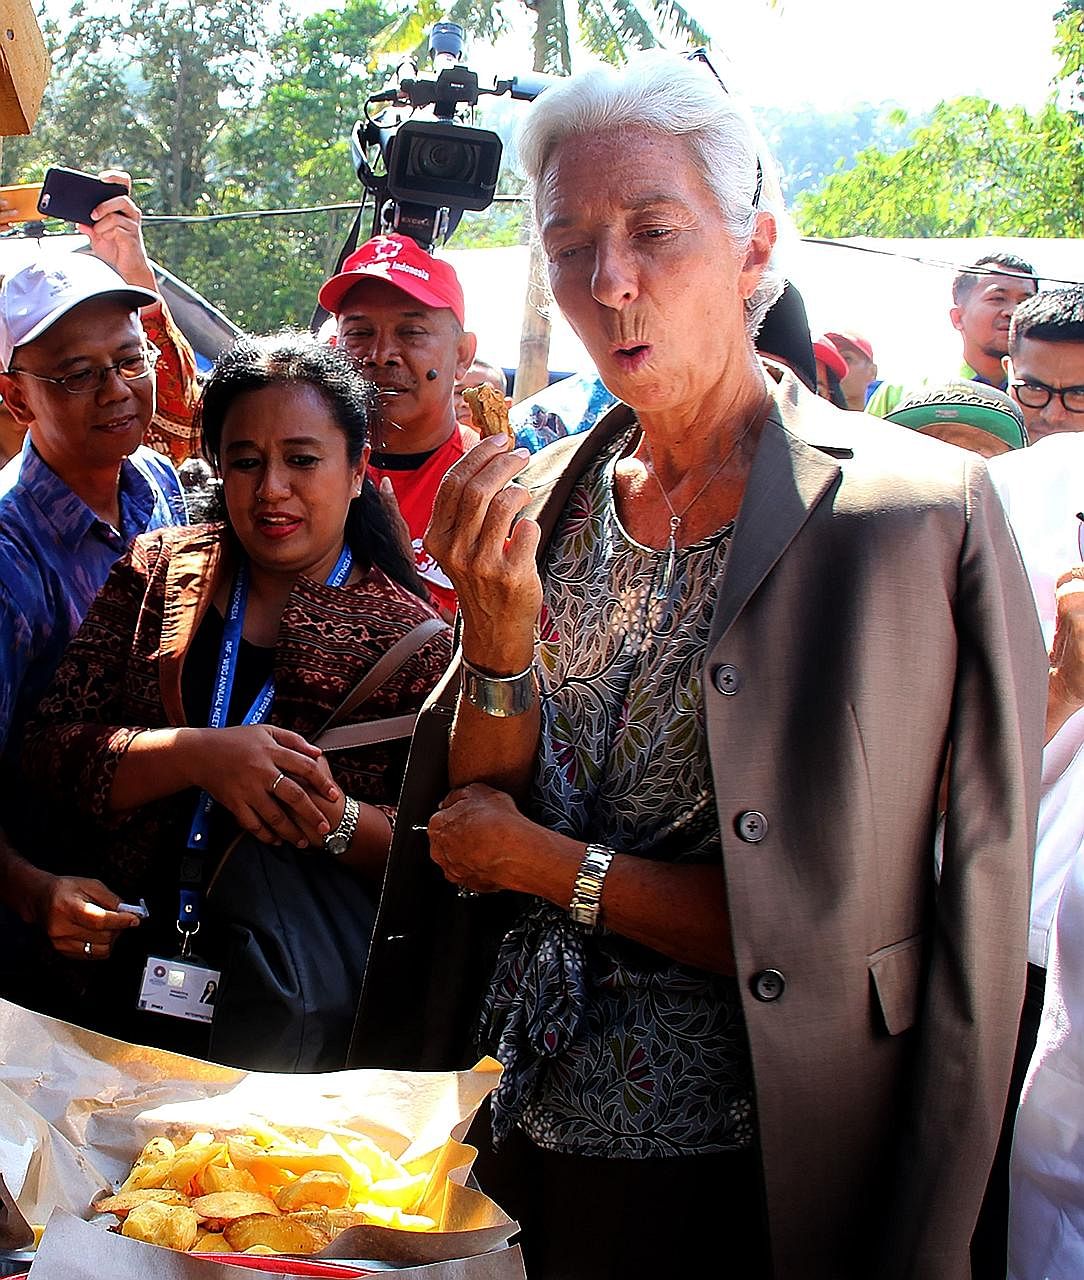 IMF chief Christine Lagarde sampling fried banana on a visit to Gunung Sari on Lombok Island on Monday. Supporters of presidential hopeful Prabowo Subianto have said the government was insensitive in going ahead with the meetings in the aftermath of 